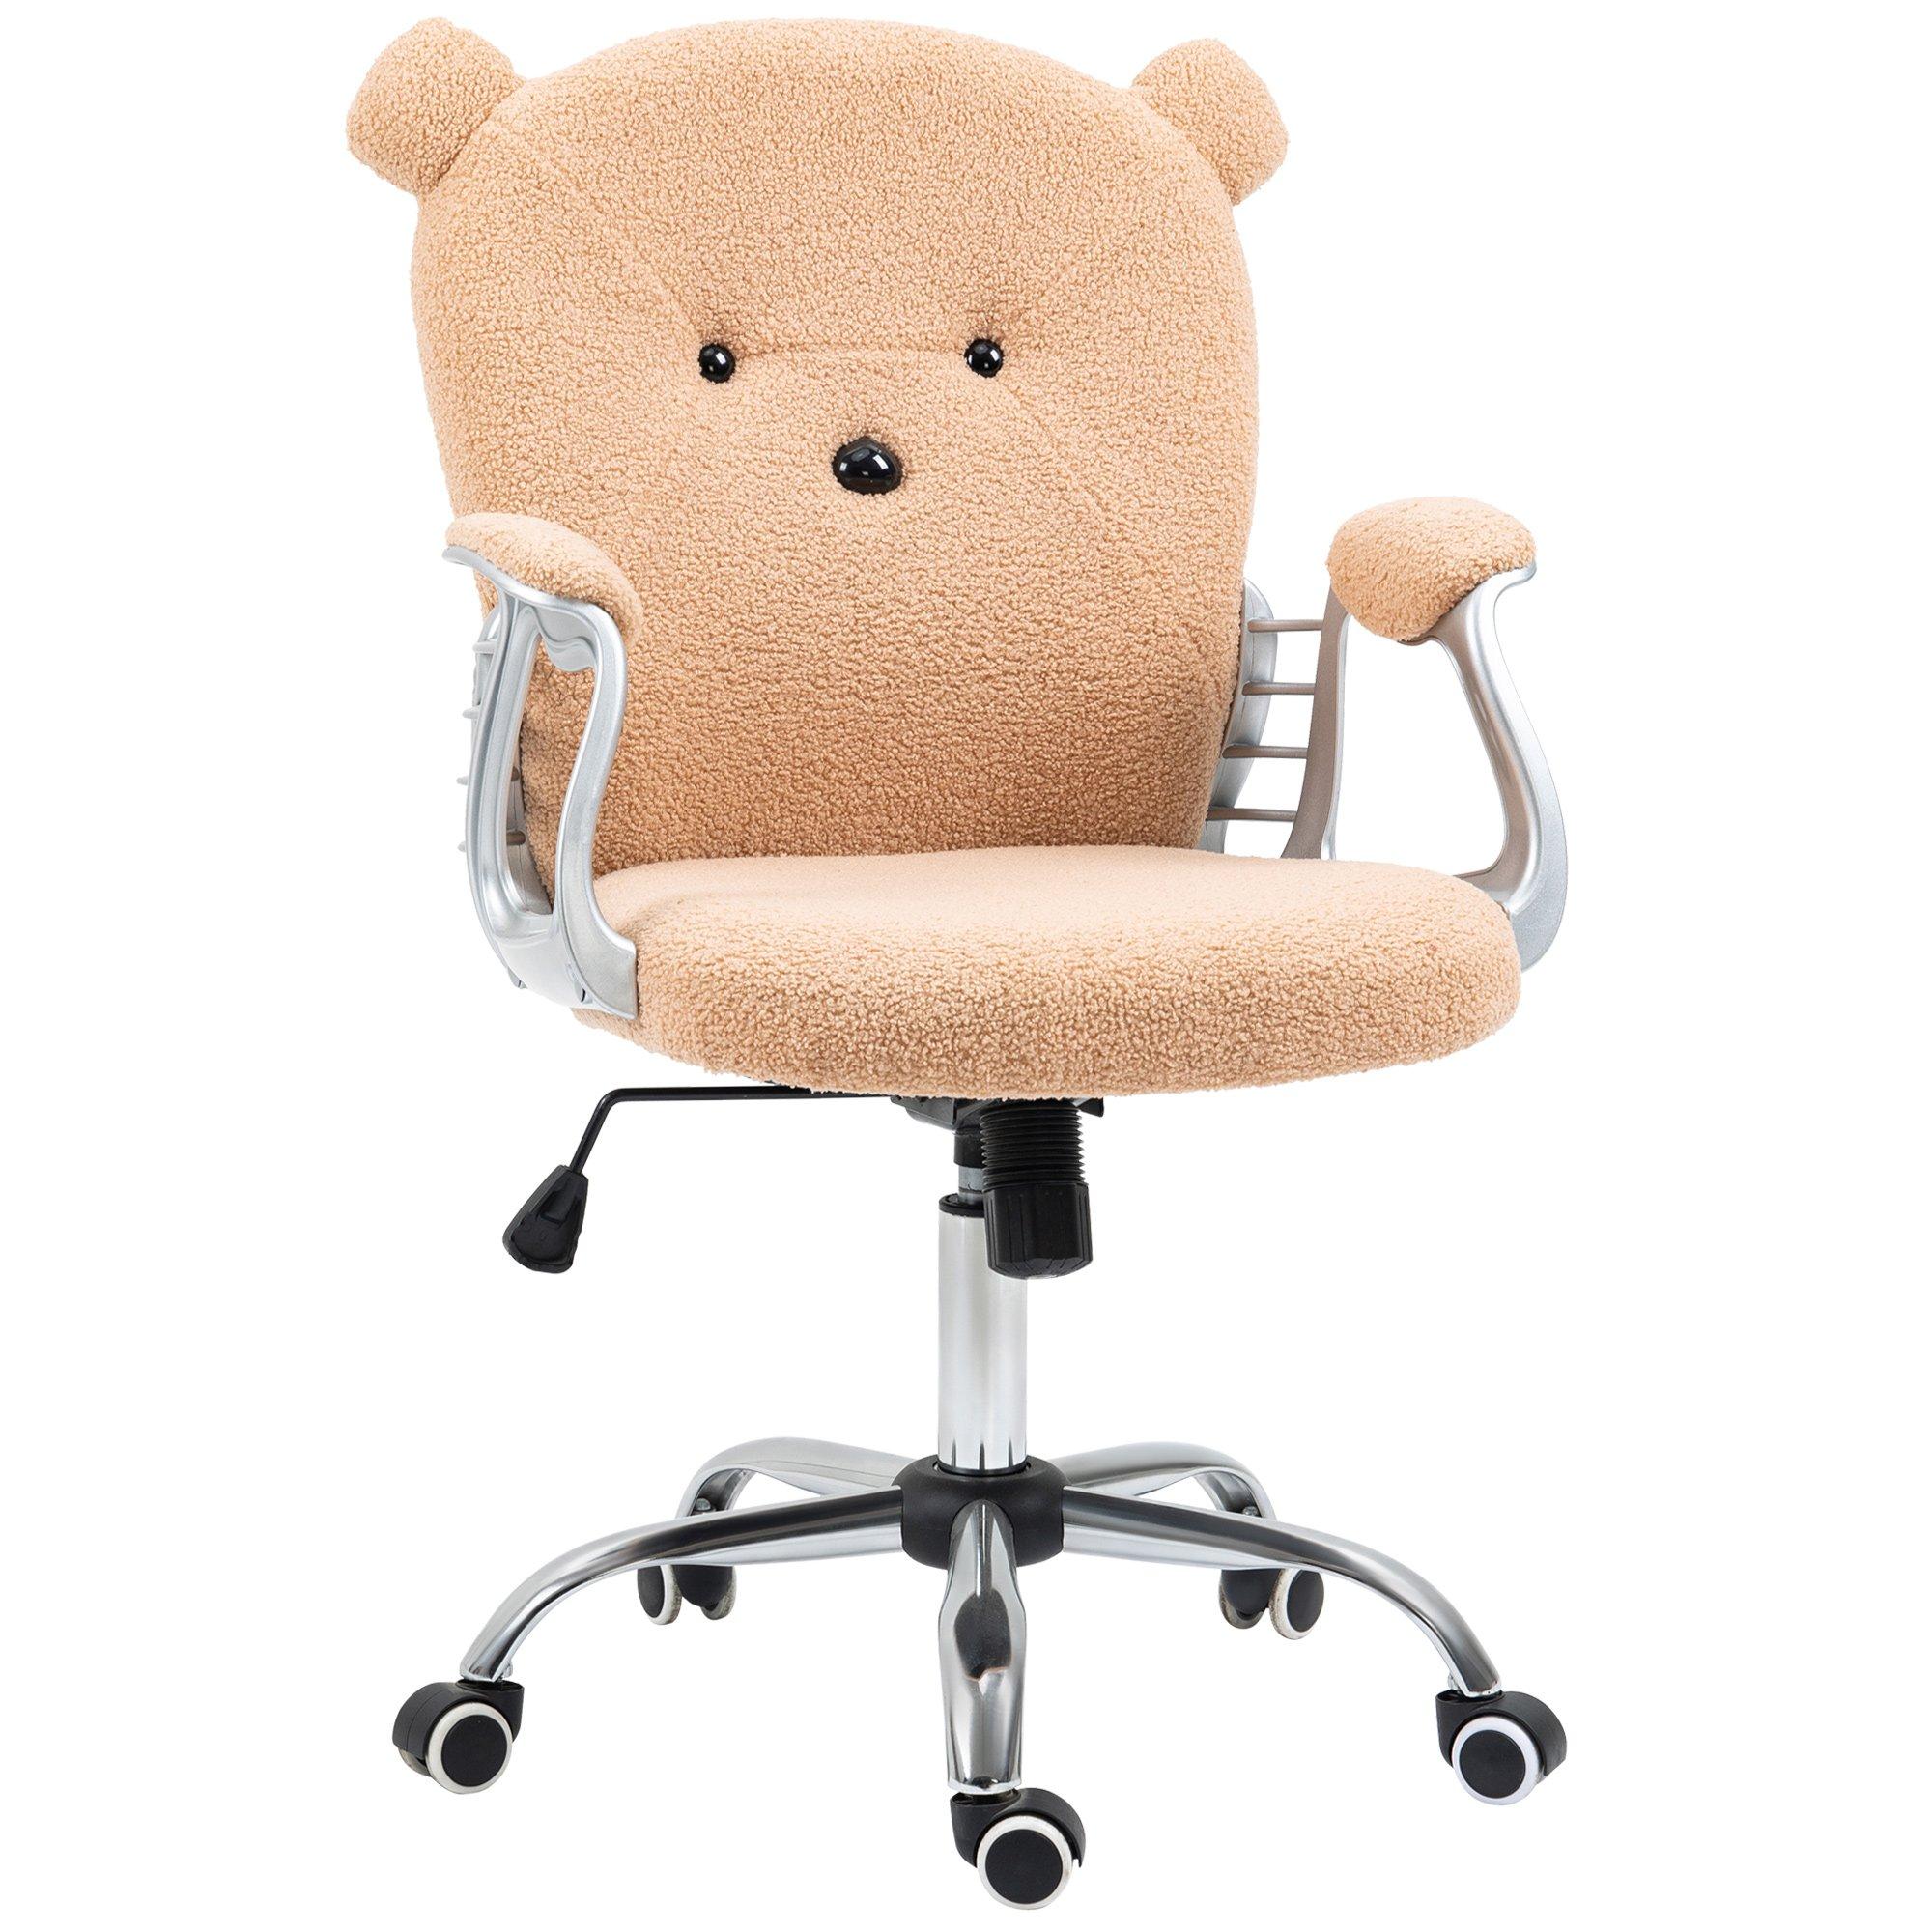 Bear Shape Home Office Chair Computer Chair with Padded Armrests